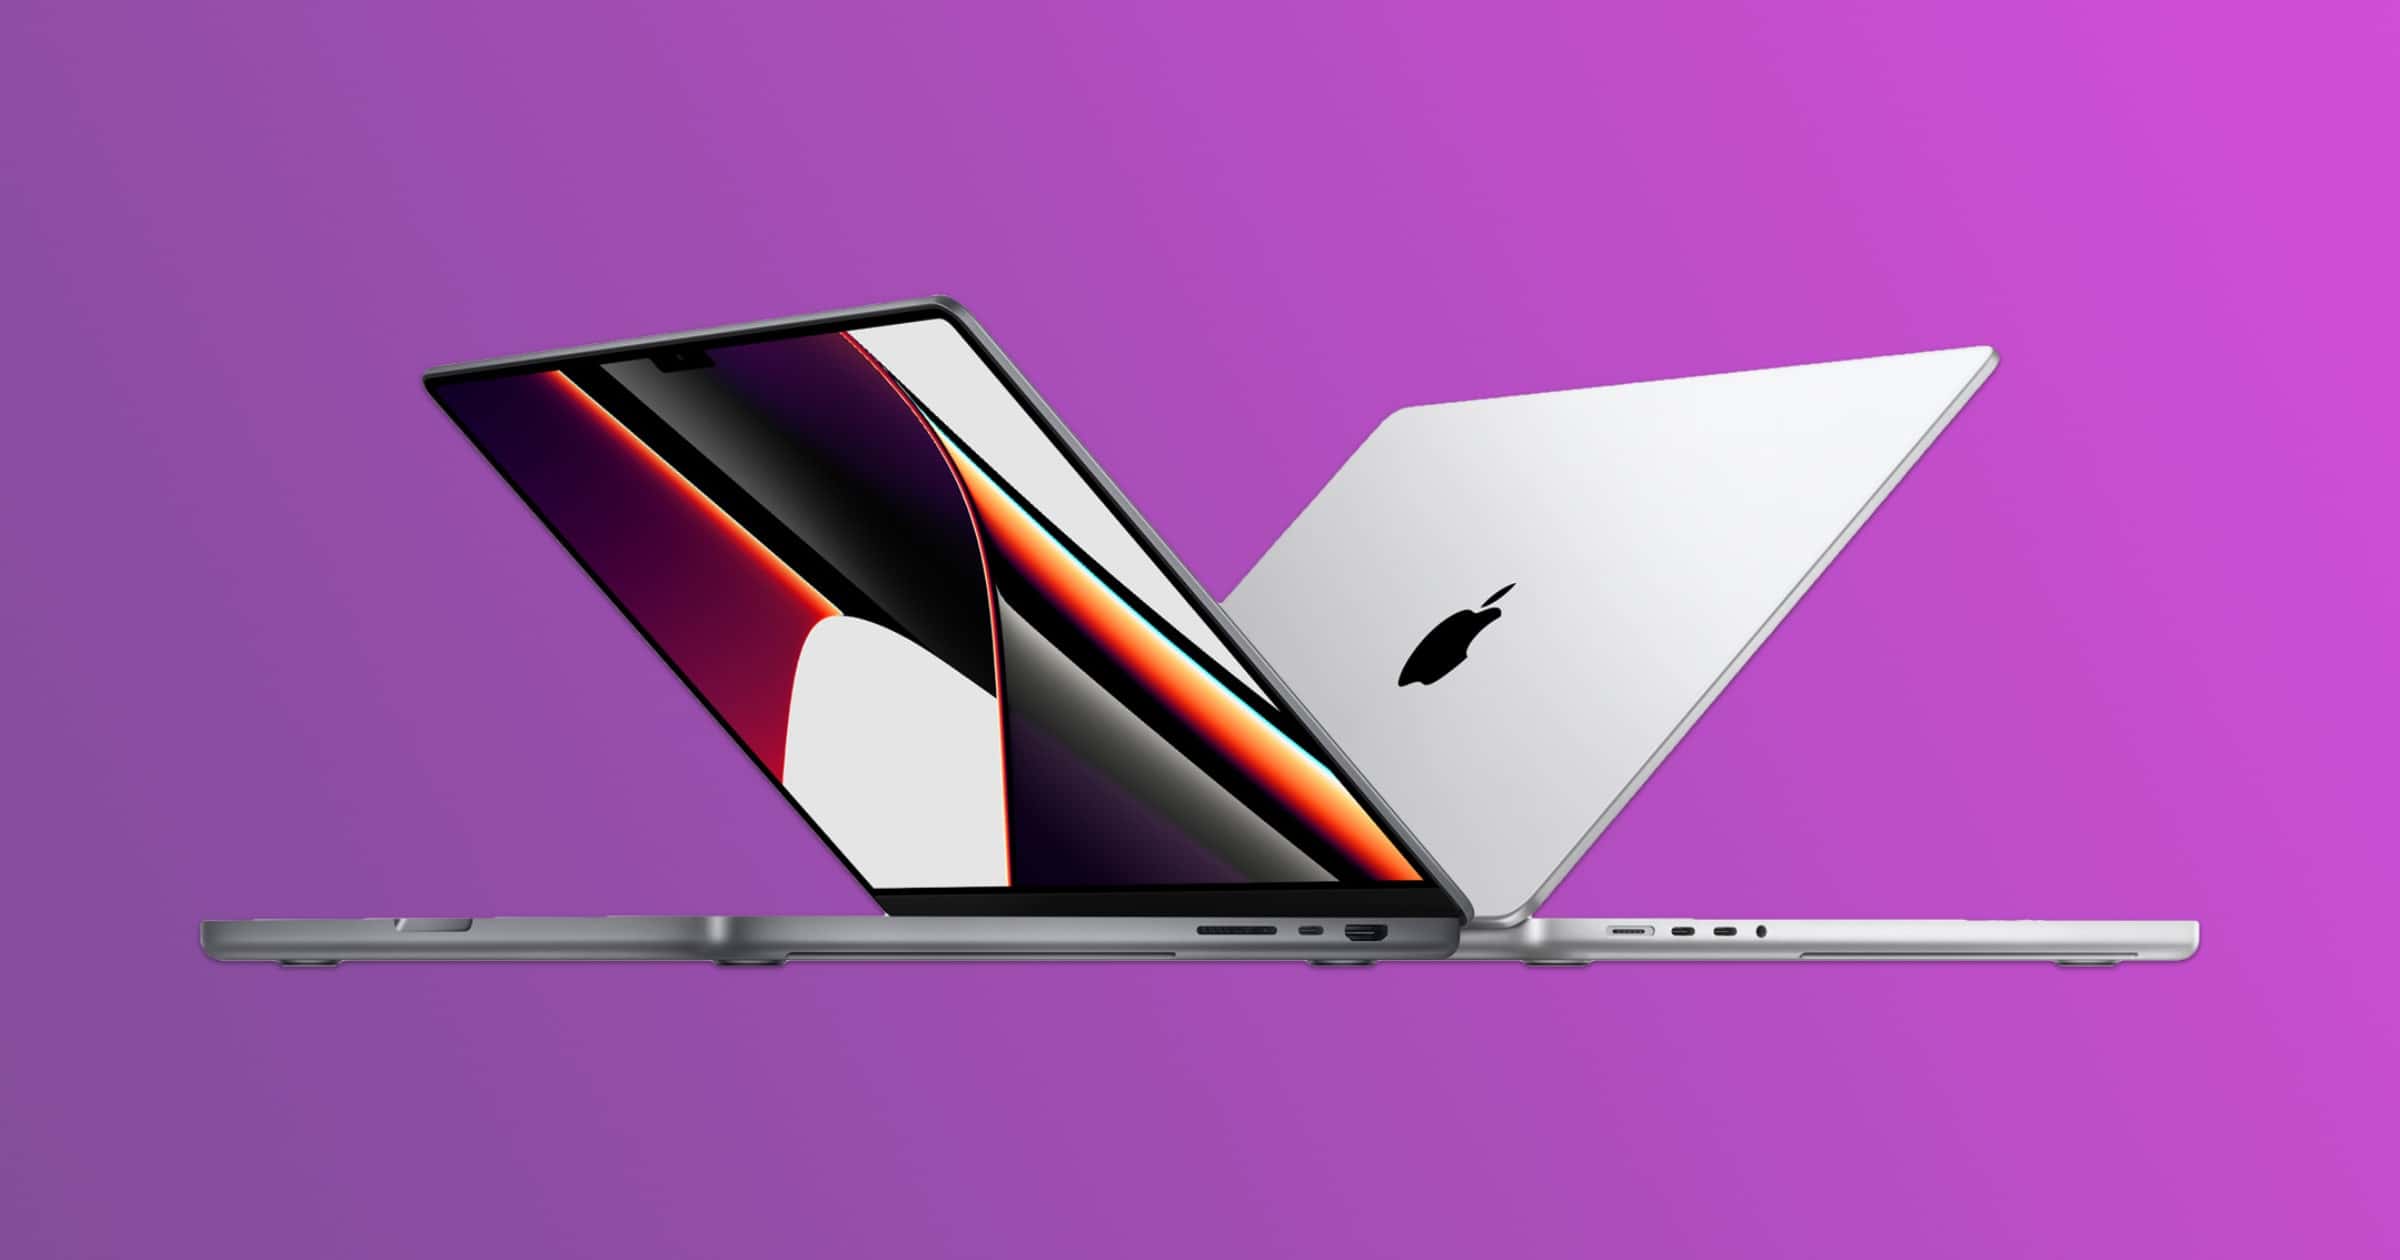 It Costs Another US$20 to Get Fast Charging For The New 14-Inch MacBook Pro